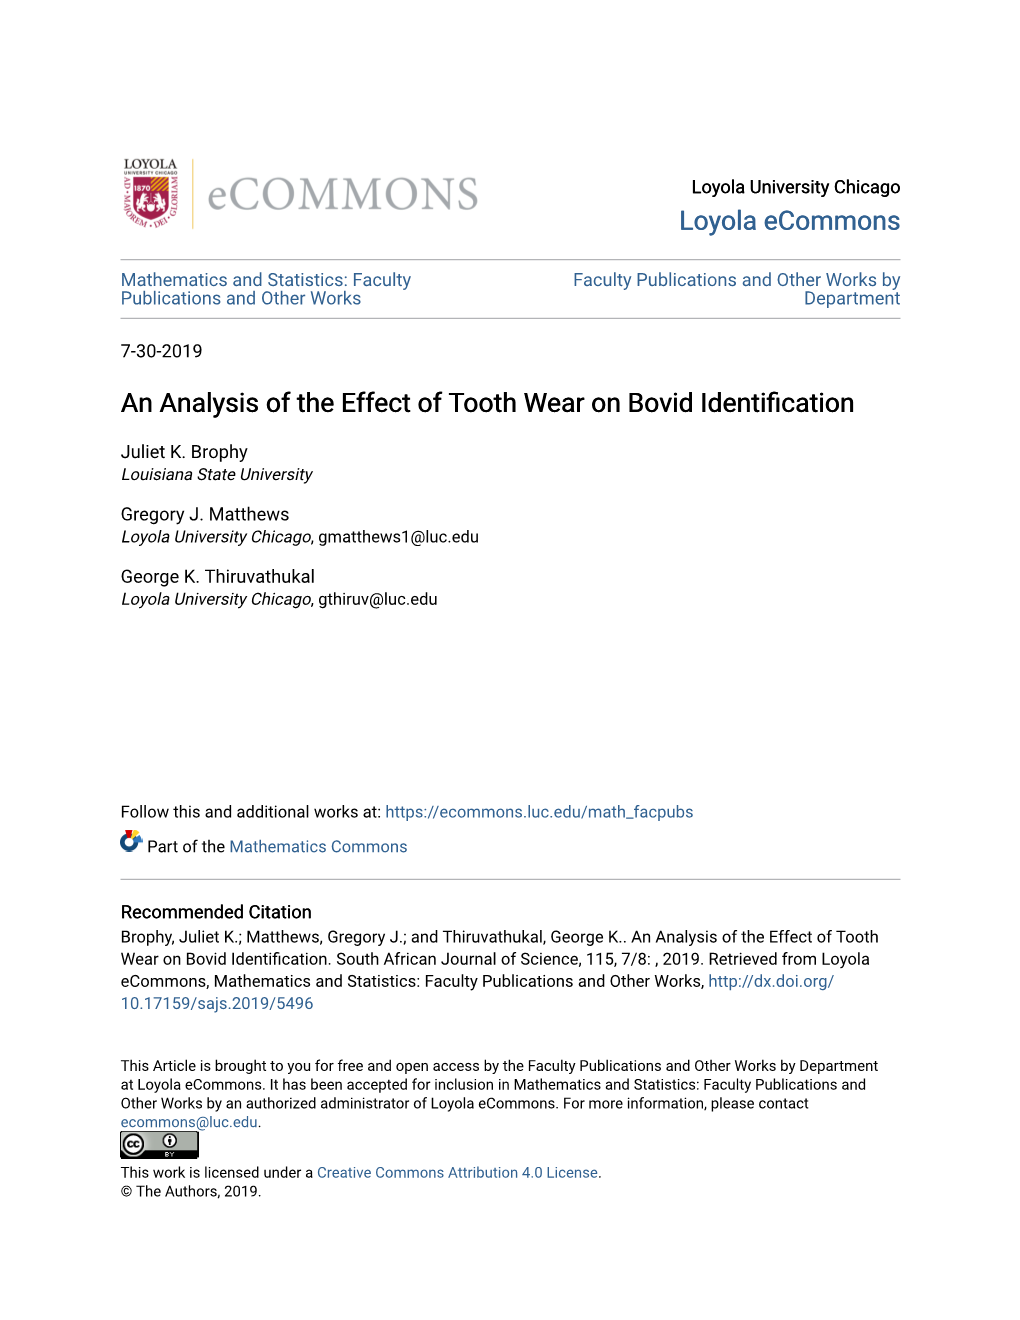 An Analysis of the Effect of Tooth Wear on Bovid Identification